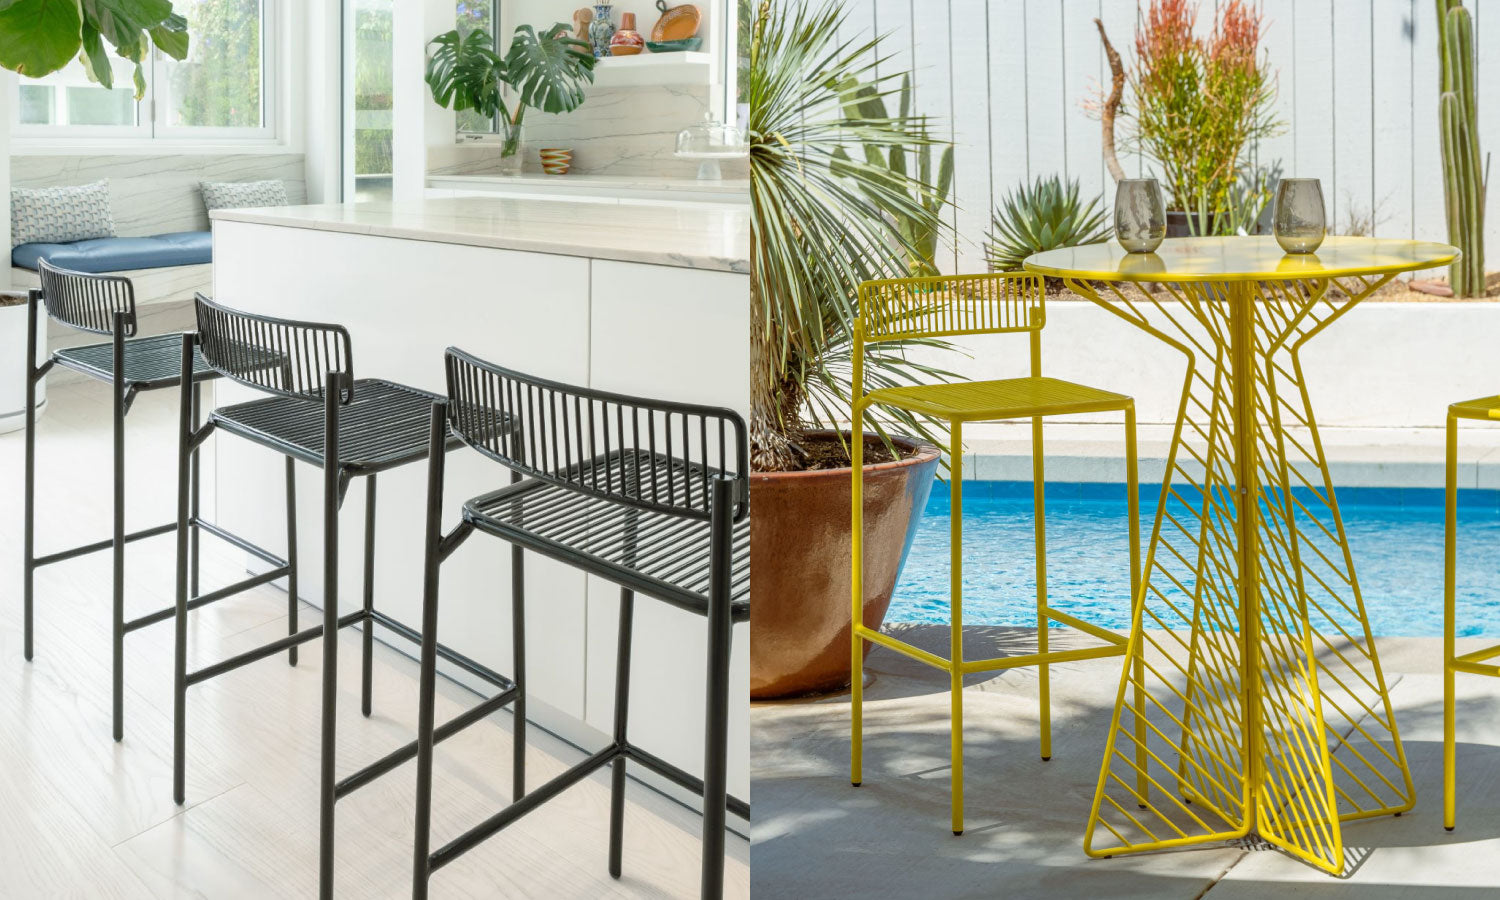 The Rachel Bar Stool in Black and Yellow colors. Shown inside at a kitchen bar and outside with the Cafe Bar Table in Yellow.